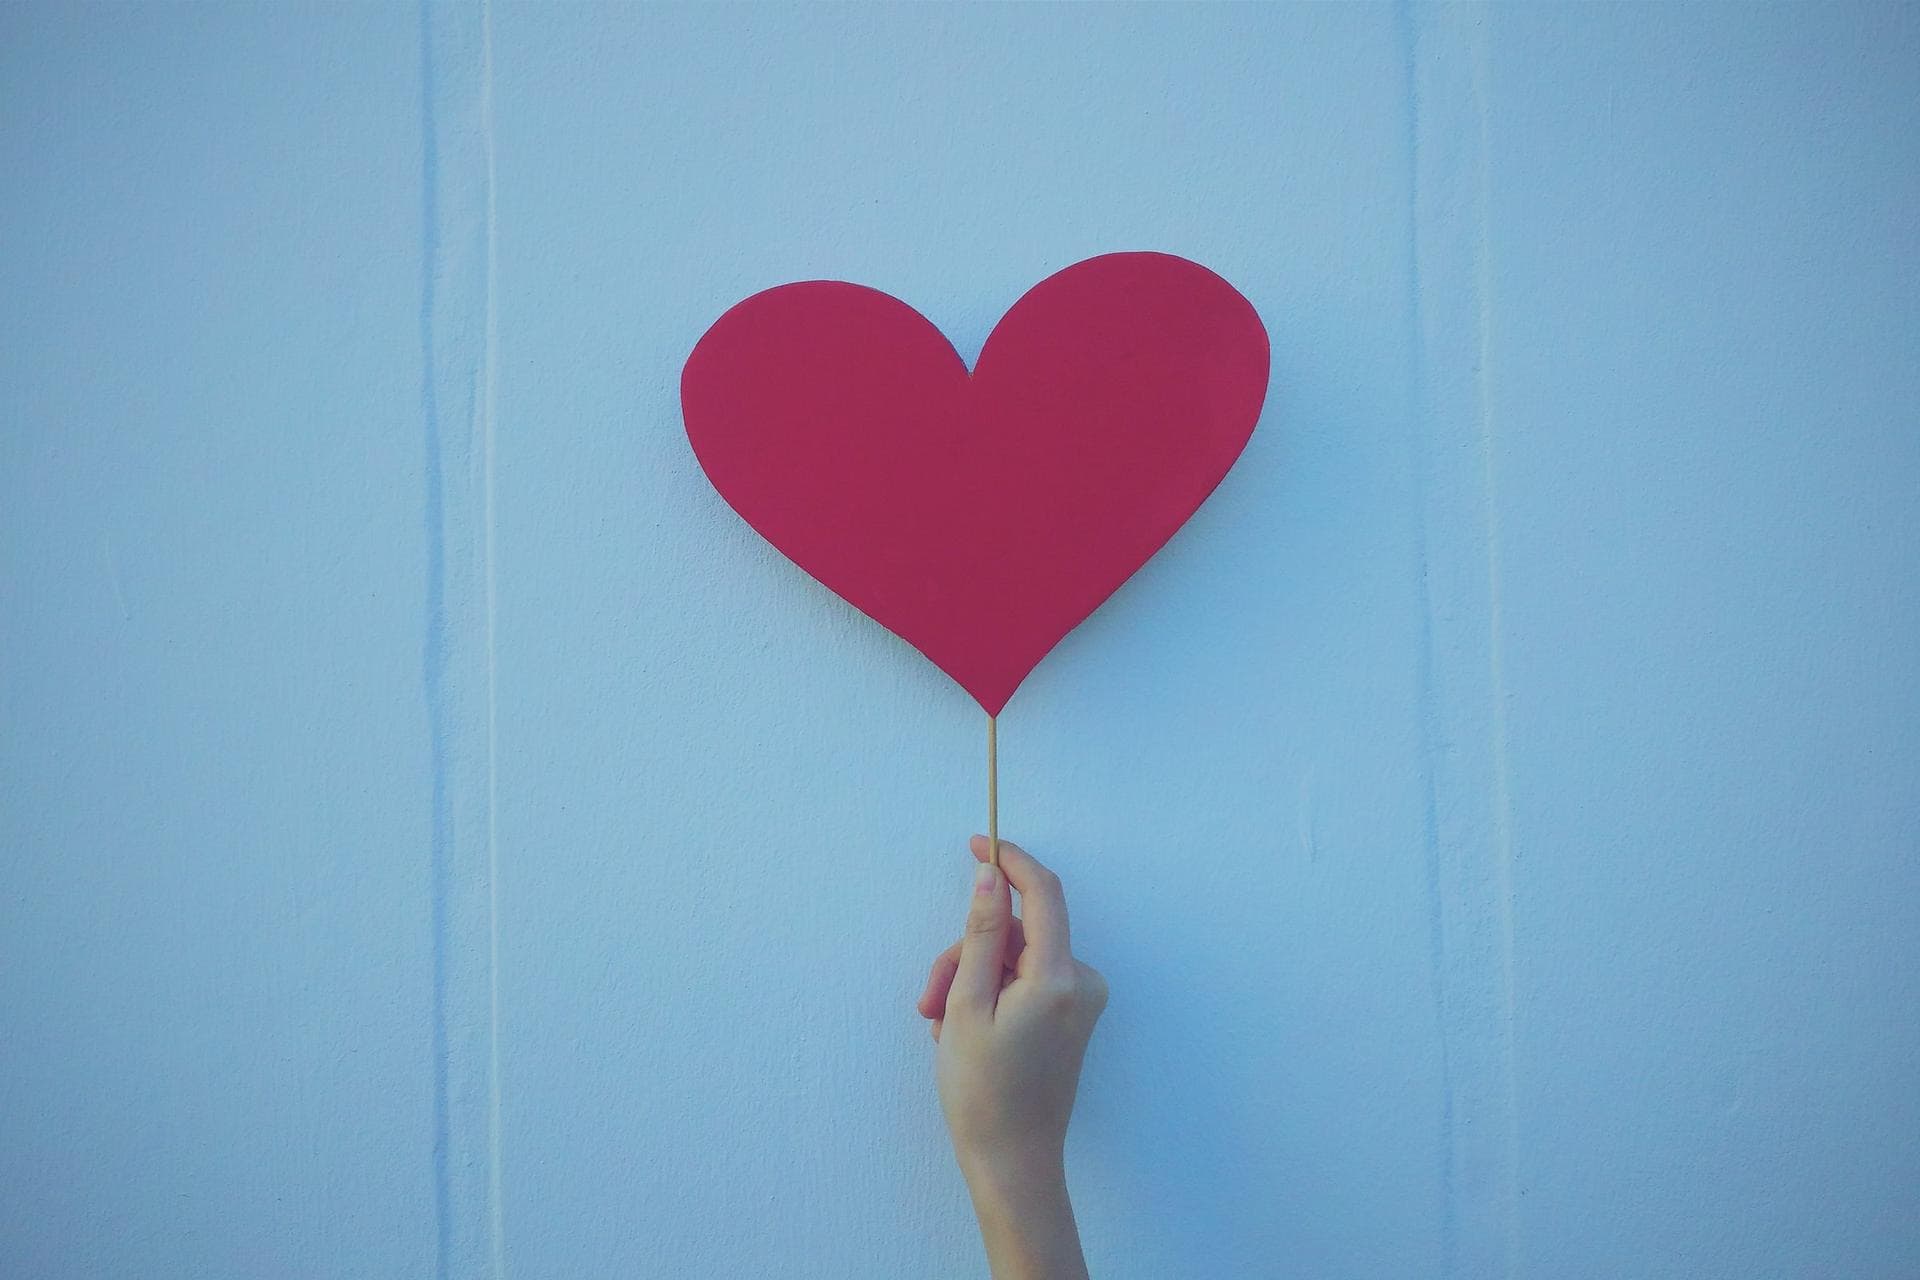 red heart in front of a light blue background